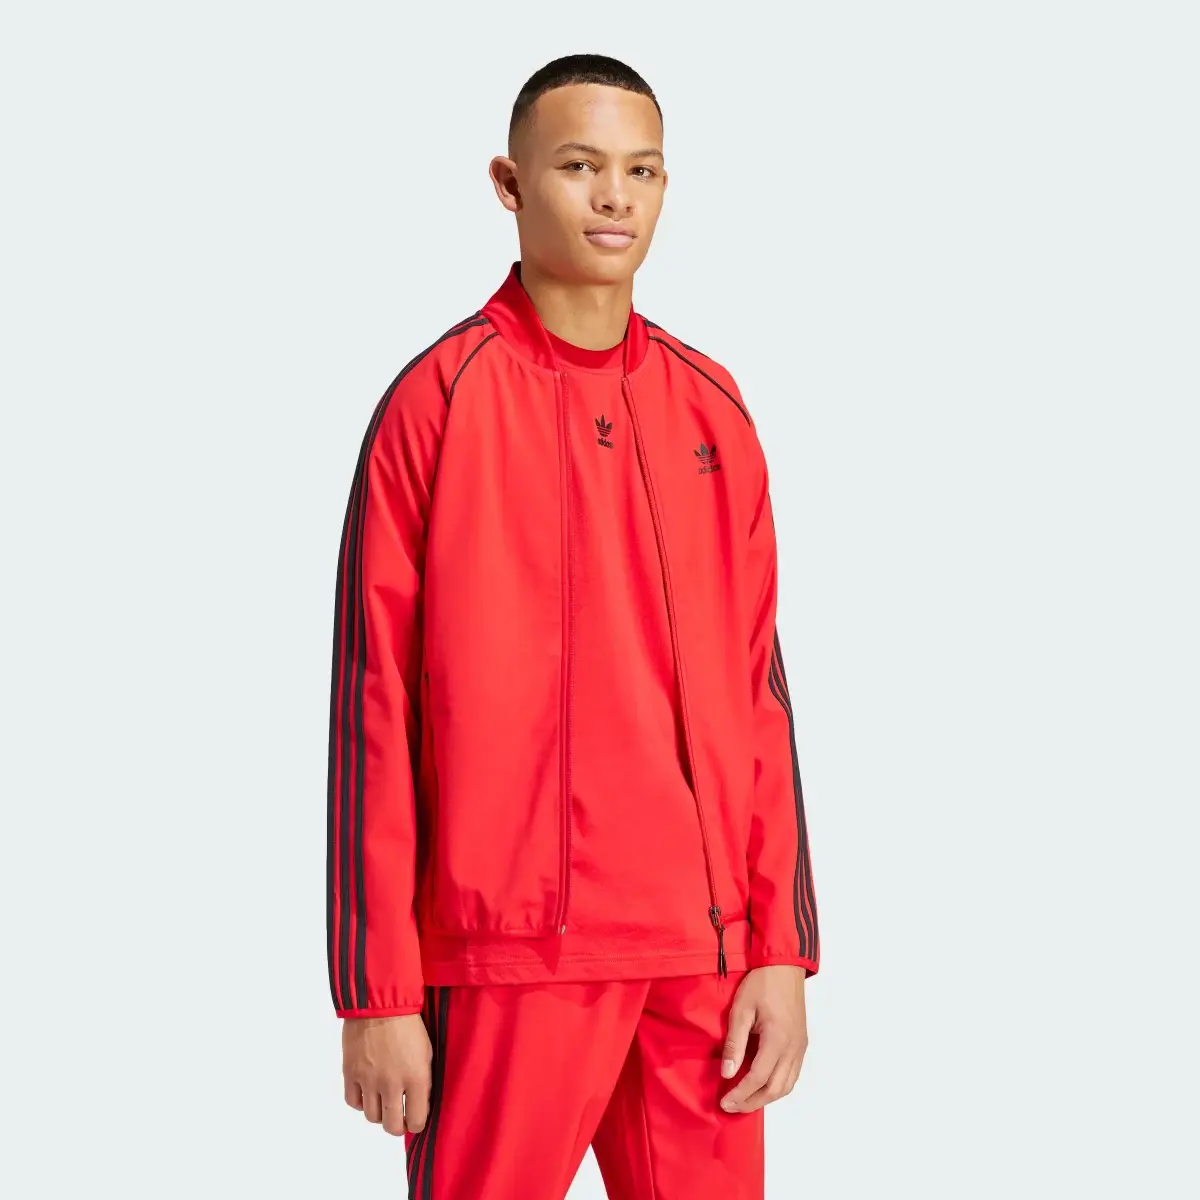 Adidas SST Bonded Track Top. 2